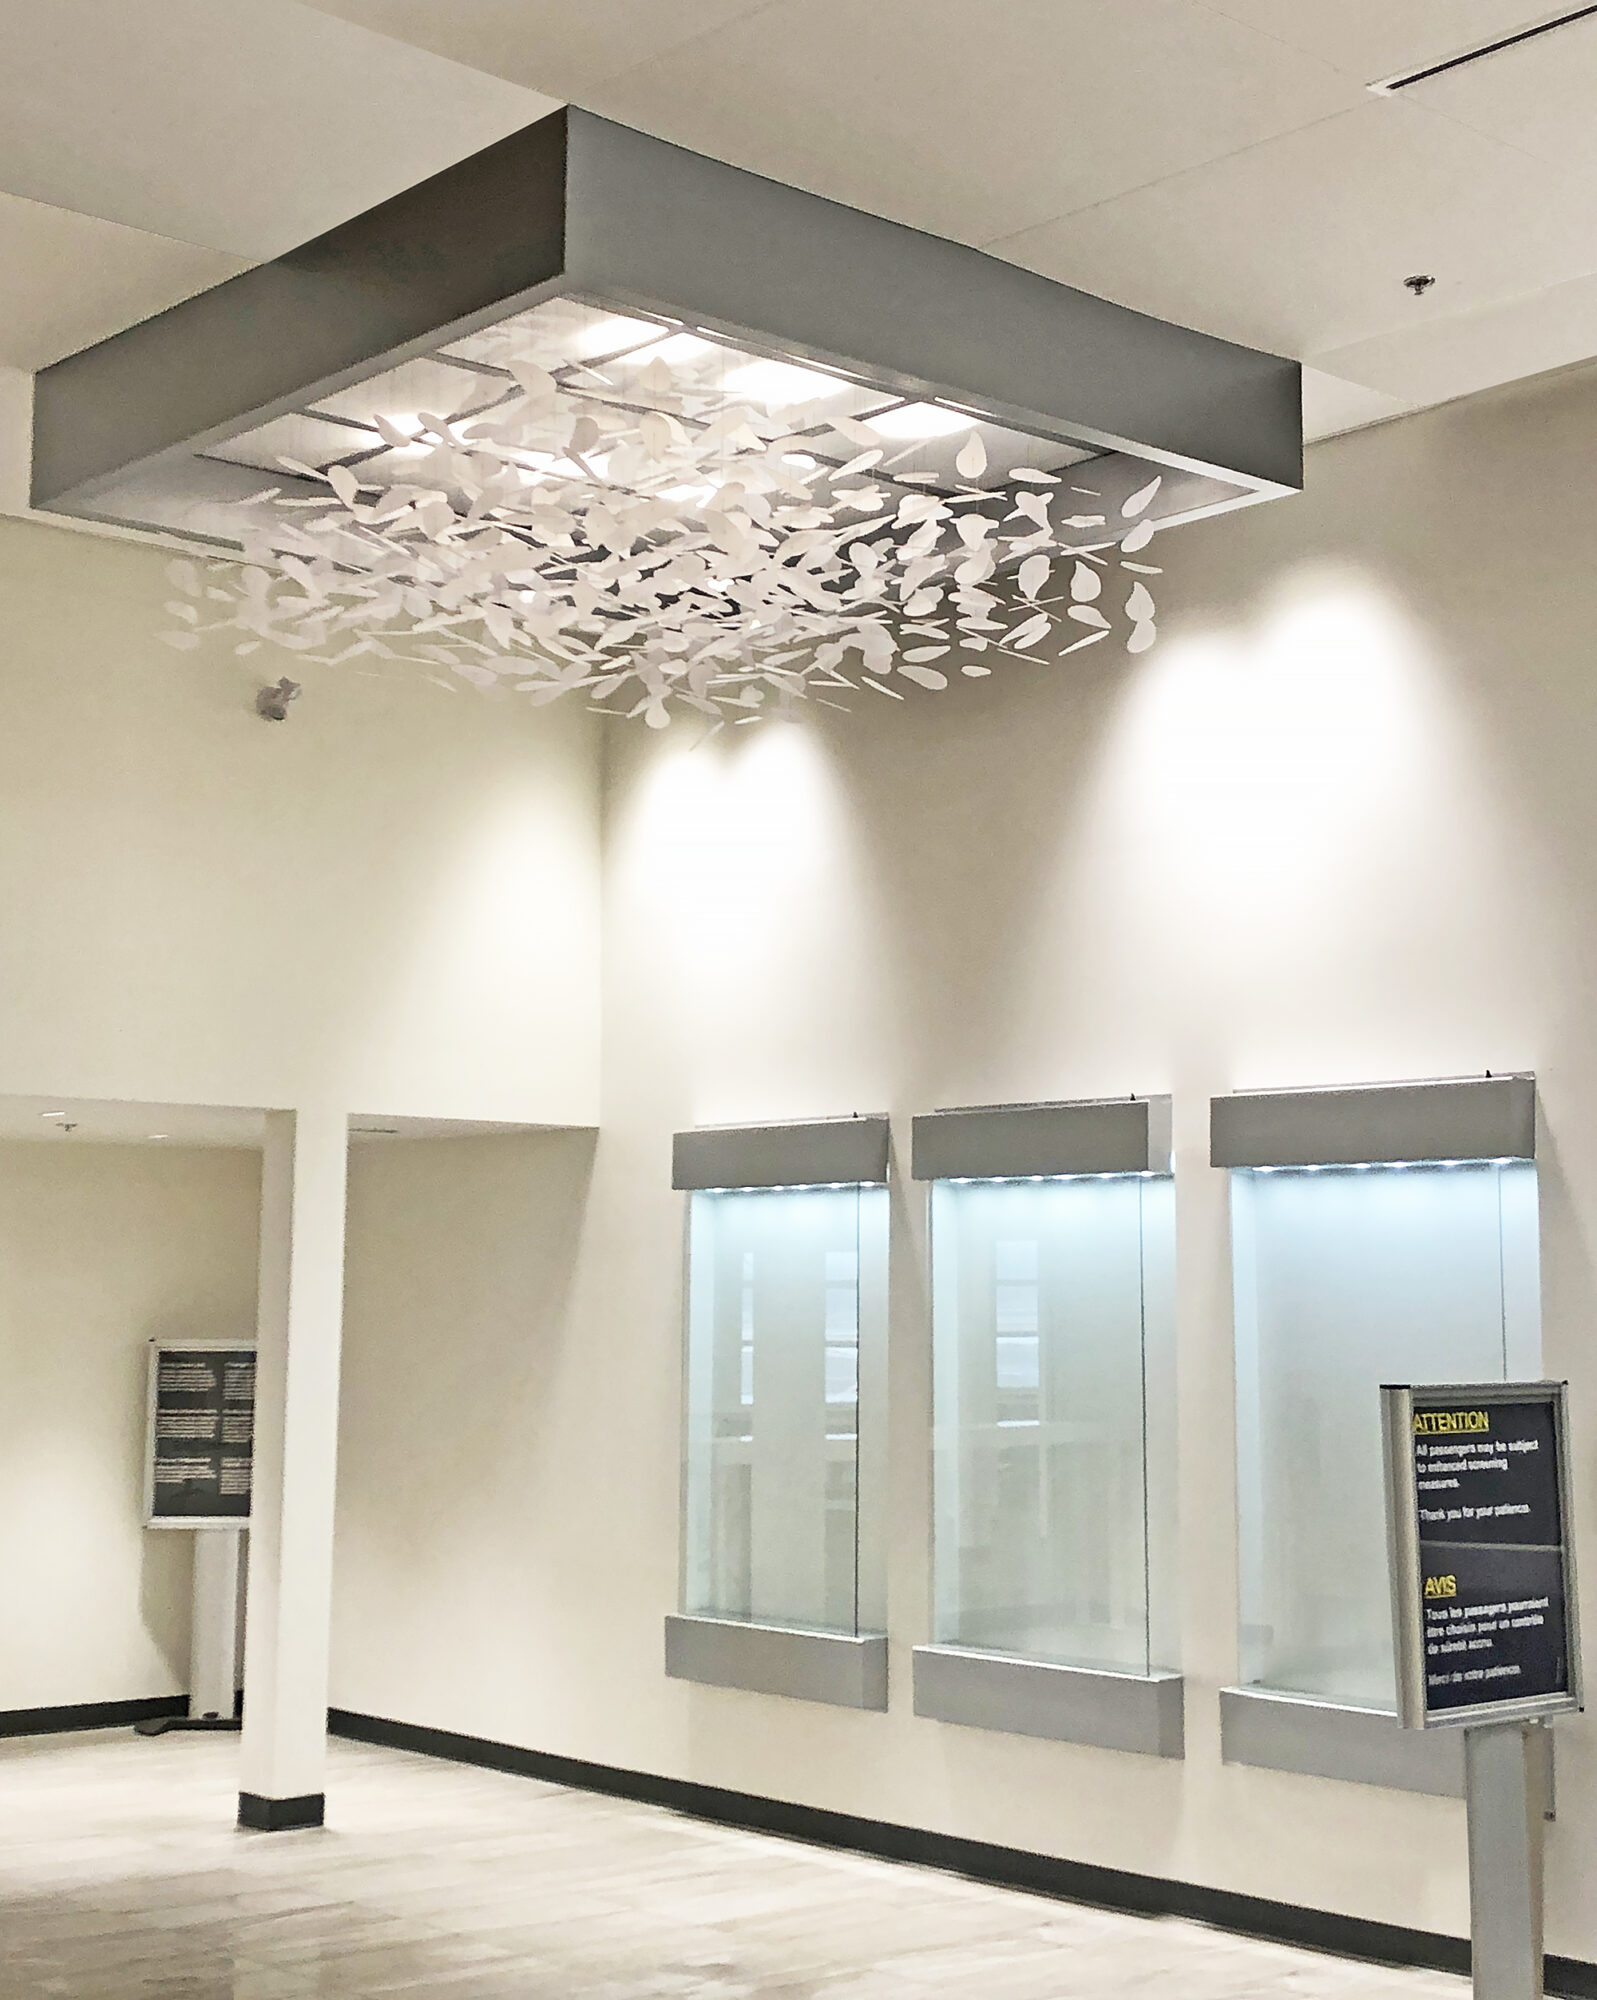 Penticton Airport – Themeworks Pendant Fixture and Wall Display Units in Departure Lounge